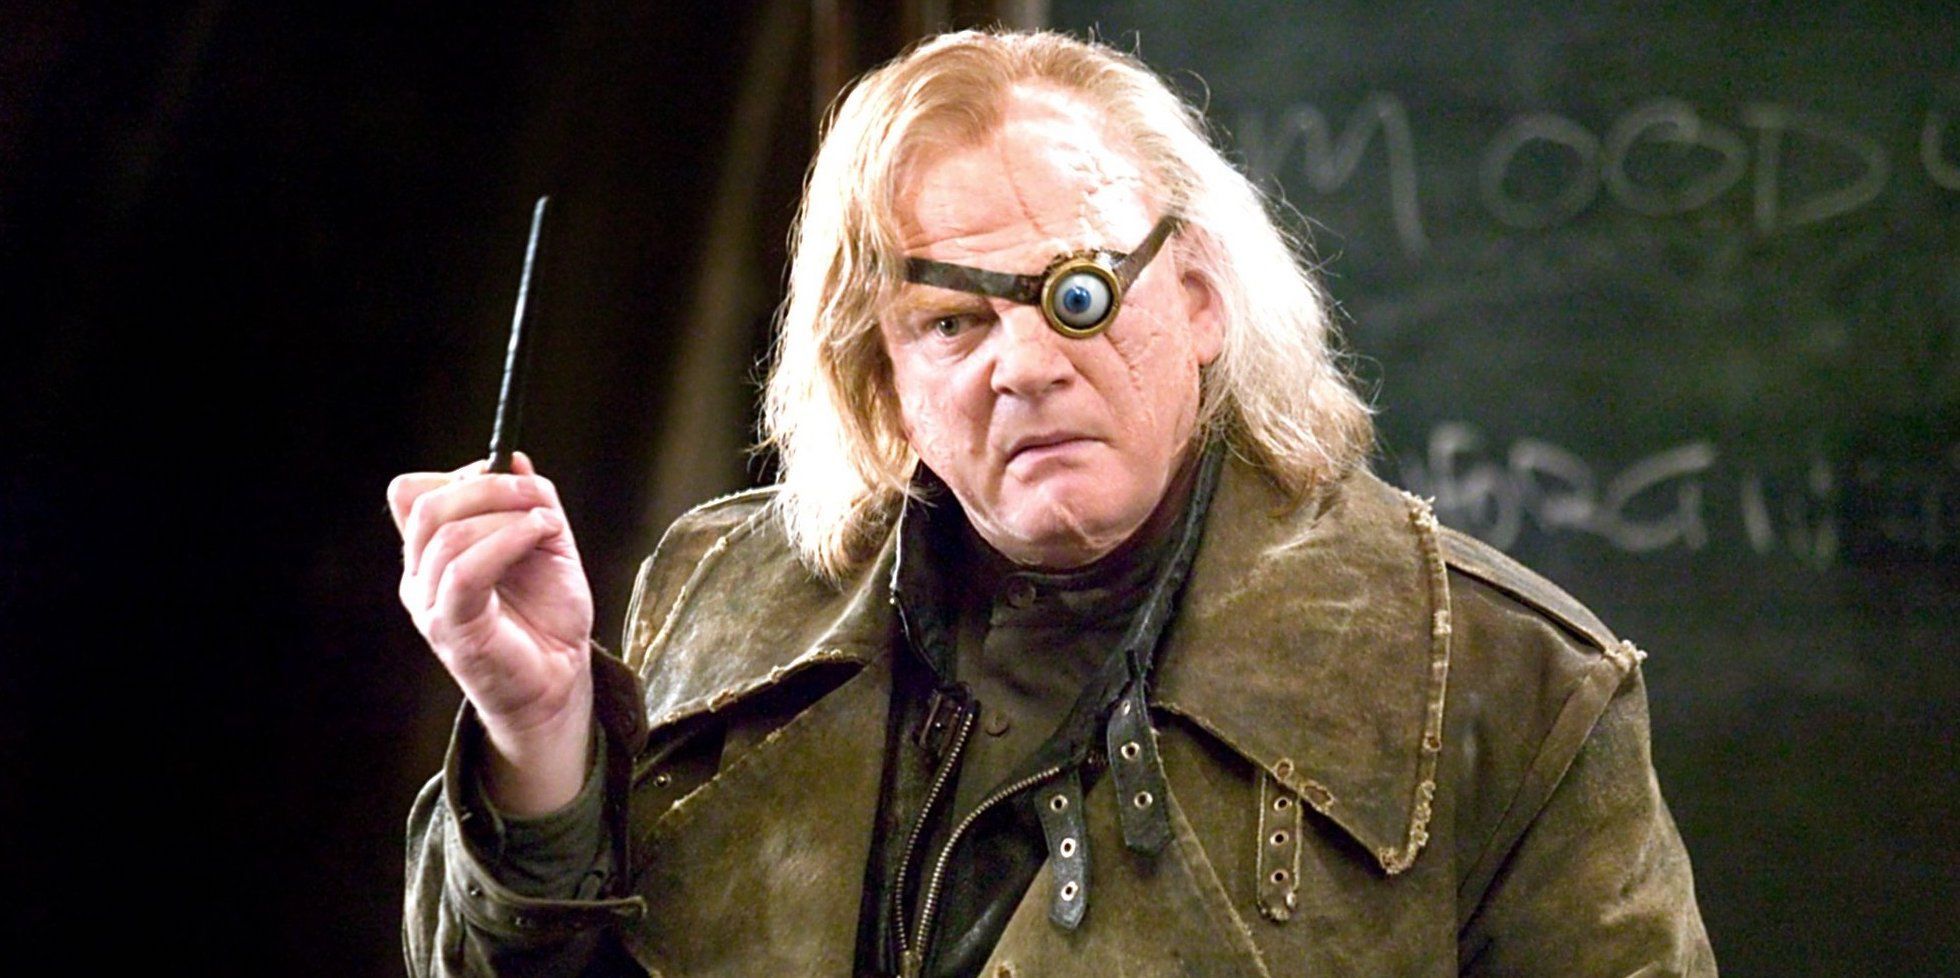 Brendan-Gleeson-as-Mad-Eye-Moody-Harry-Potter-and-the-Goblet-of-Fire